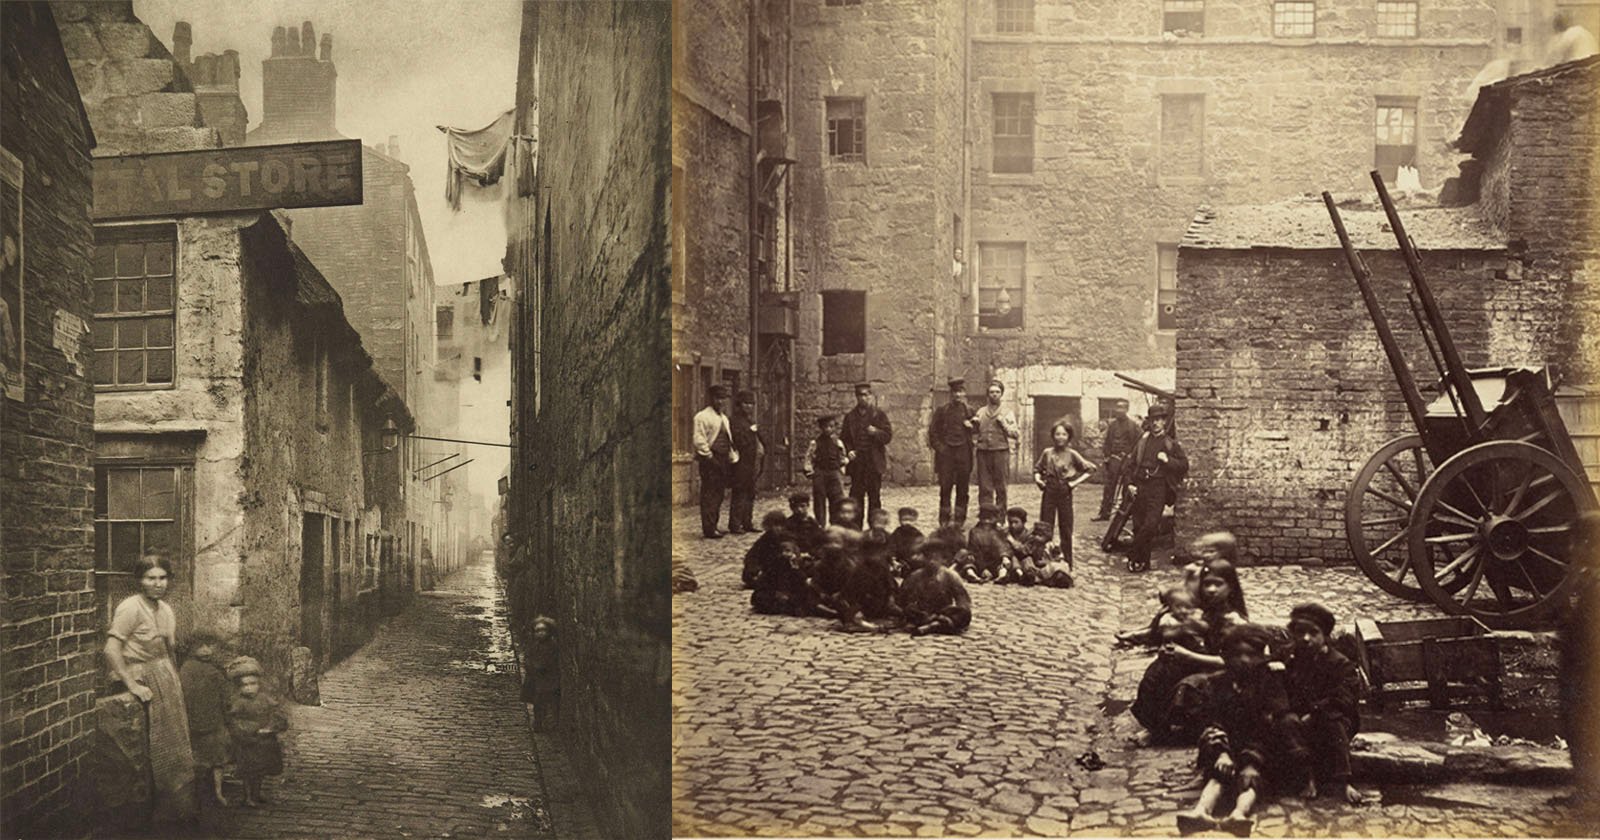 Victorian Photos Show the Plight of Scotlands Poor 150 Years Ago